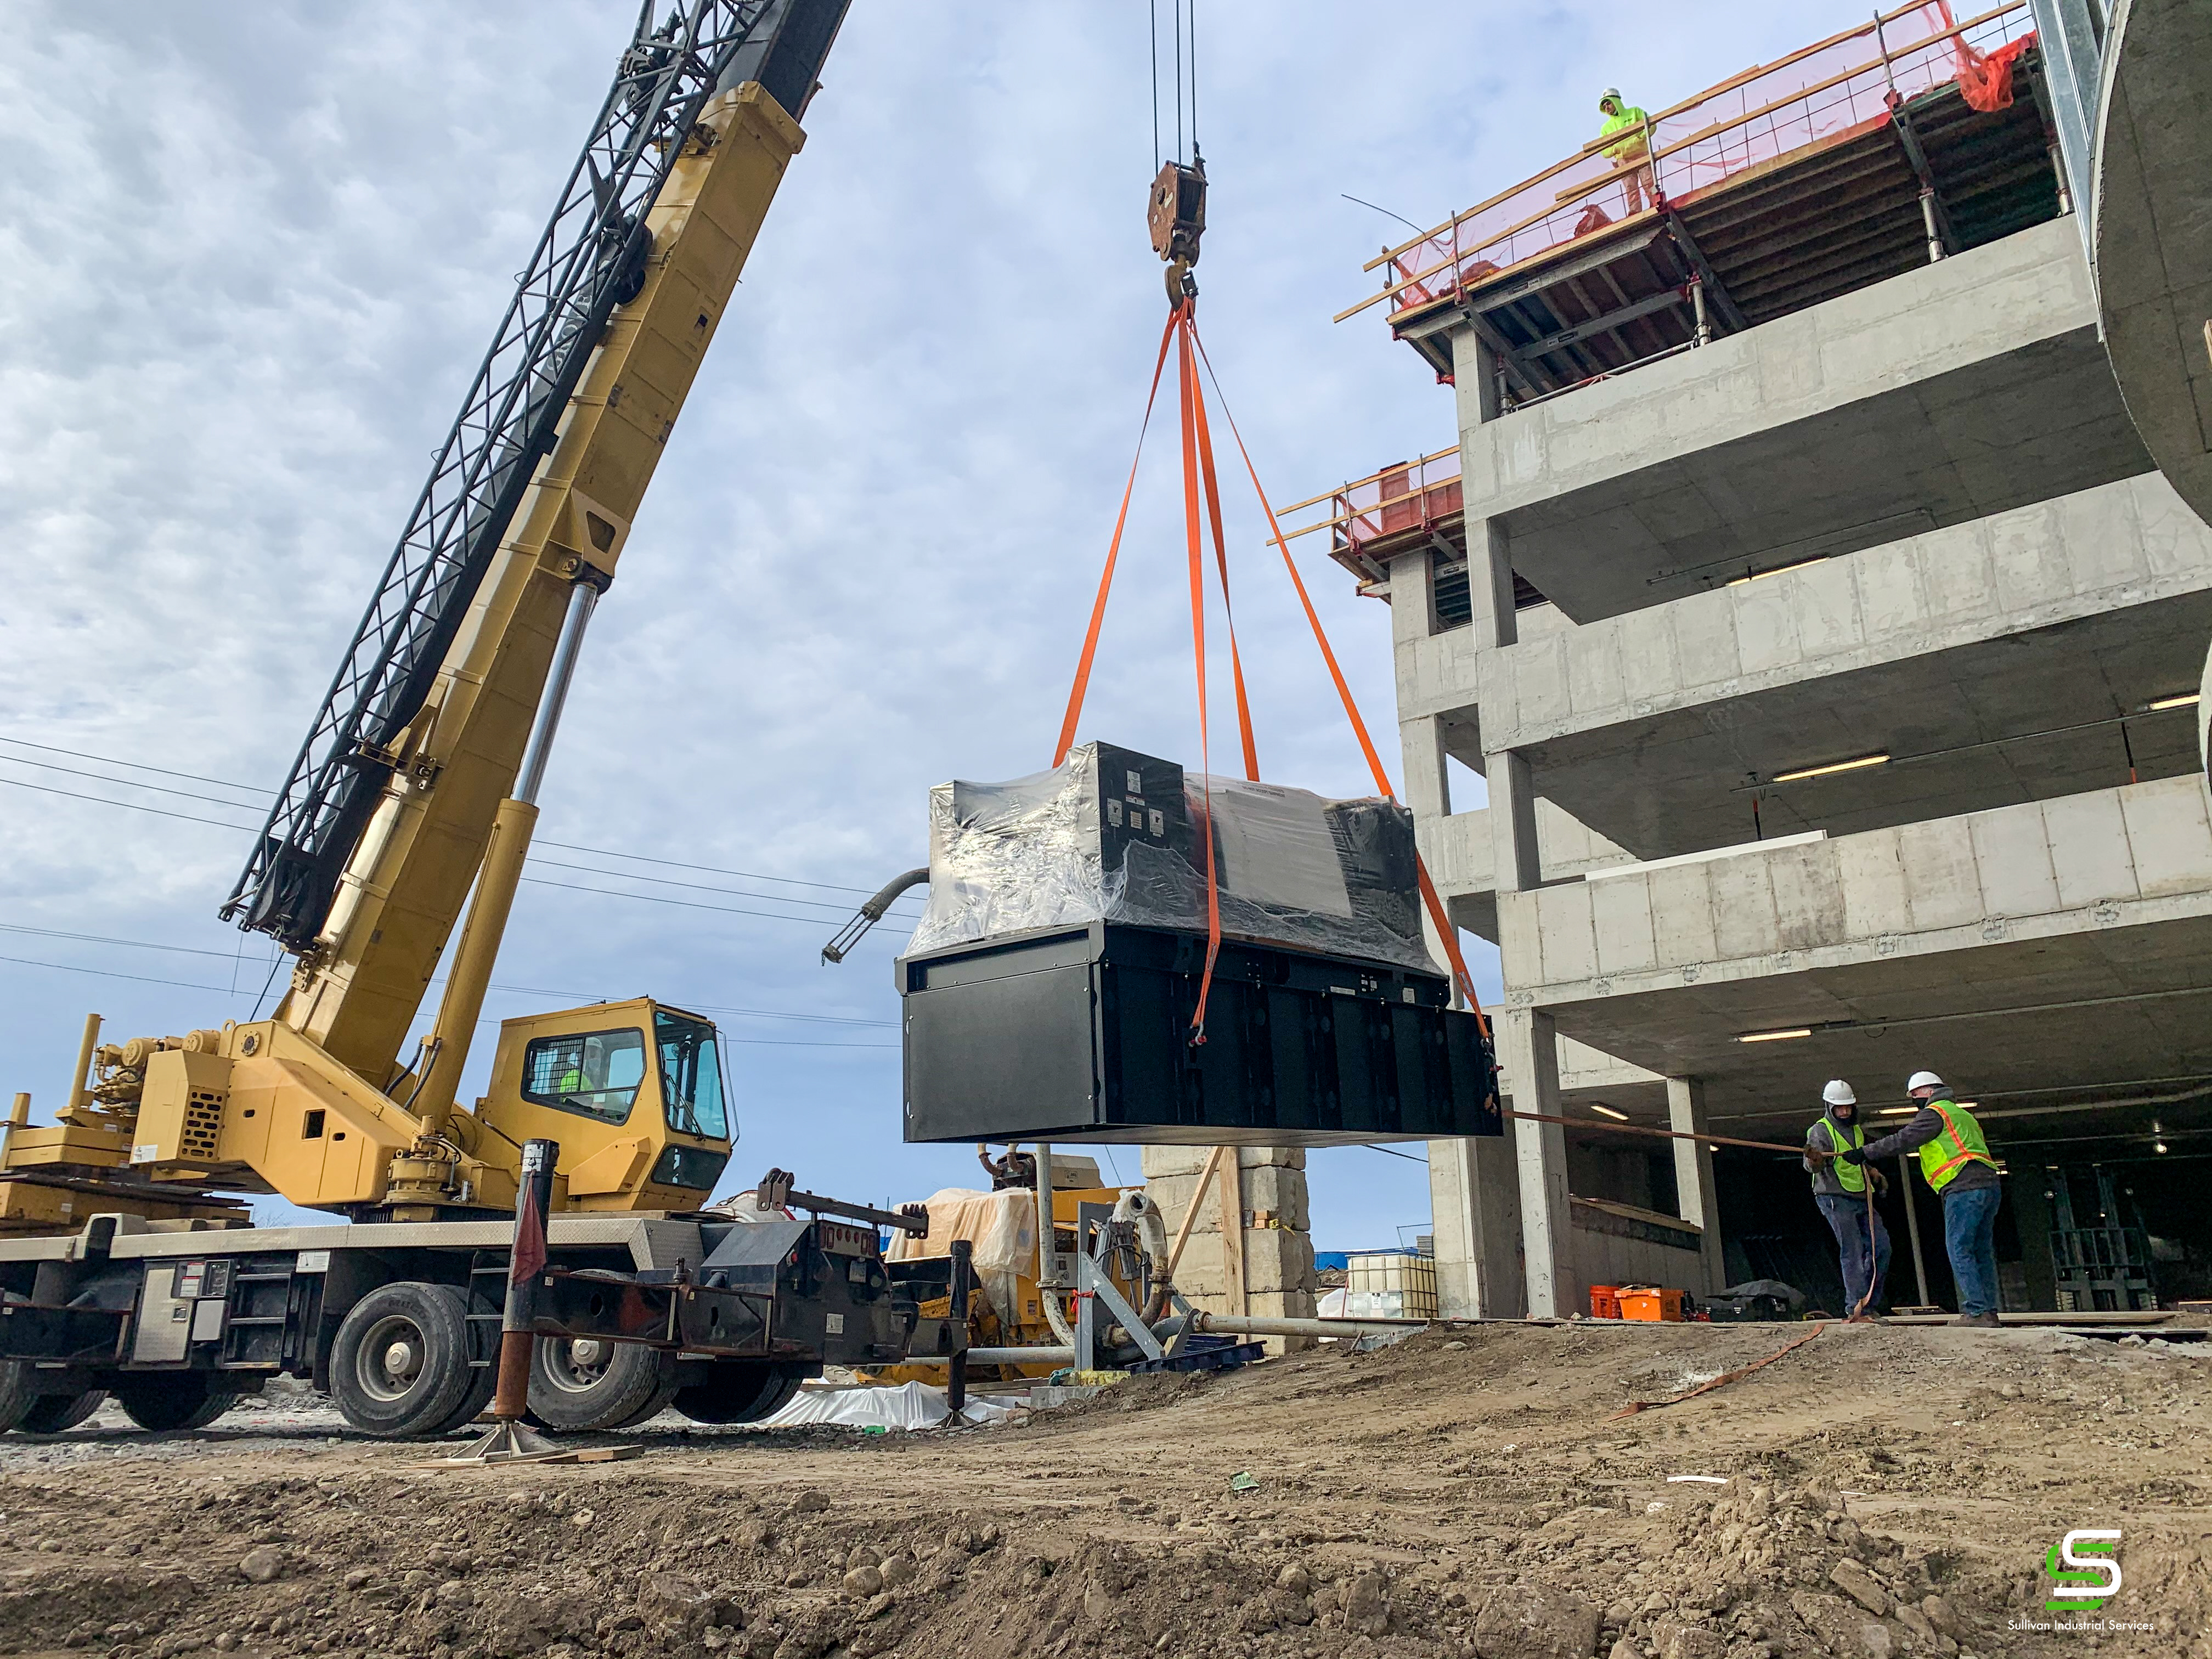 A generac generator being hoisted by a crane into place